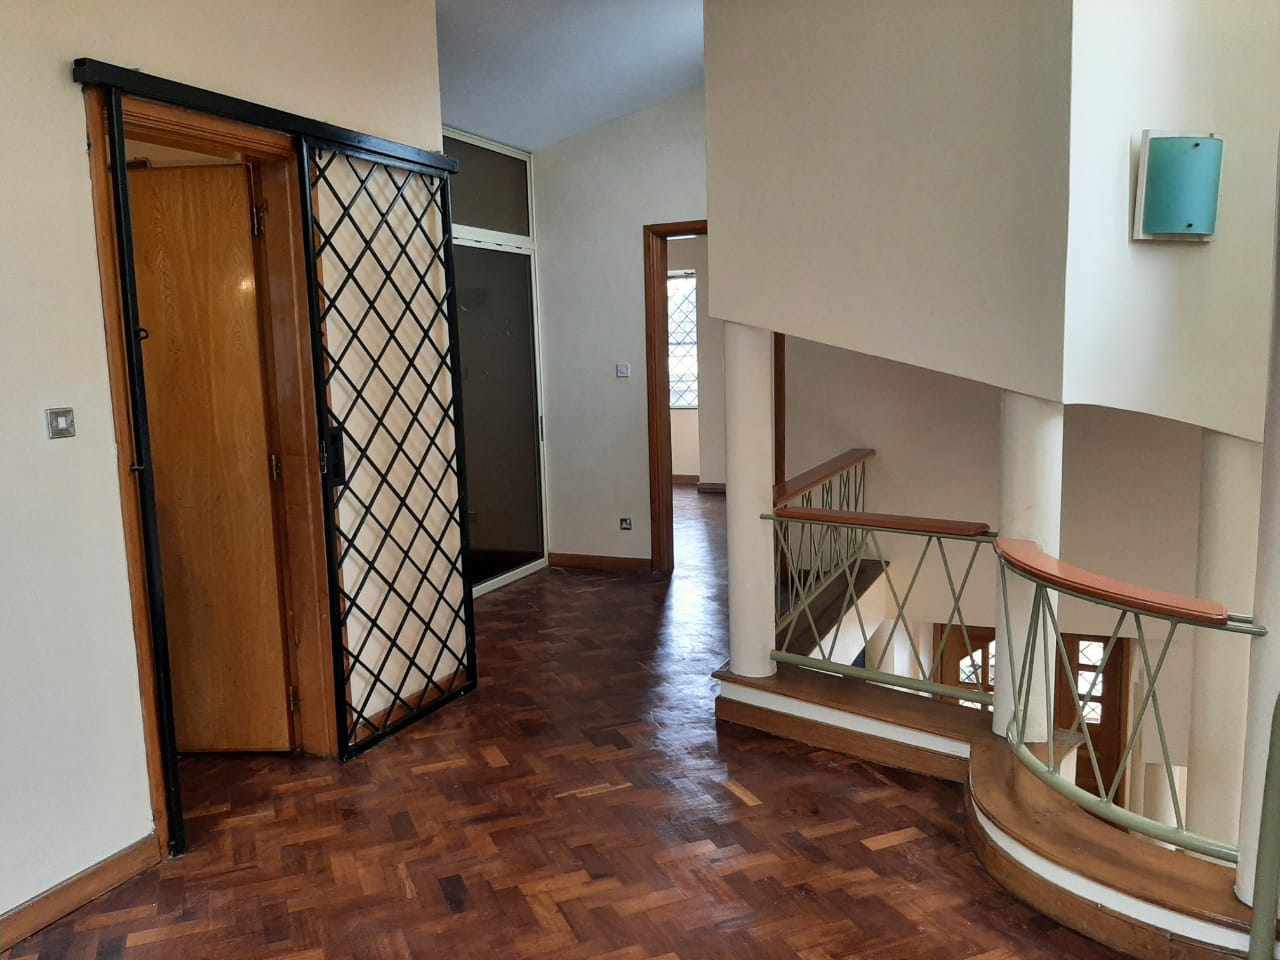 House for rent at kilimani